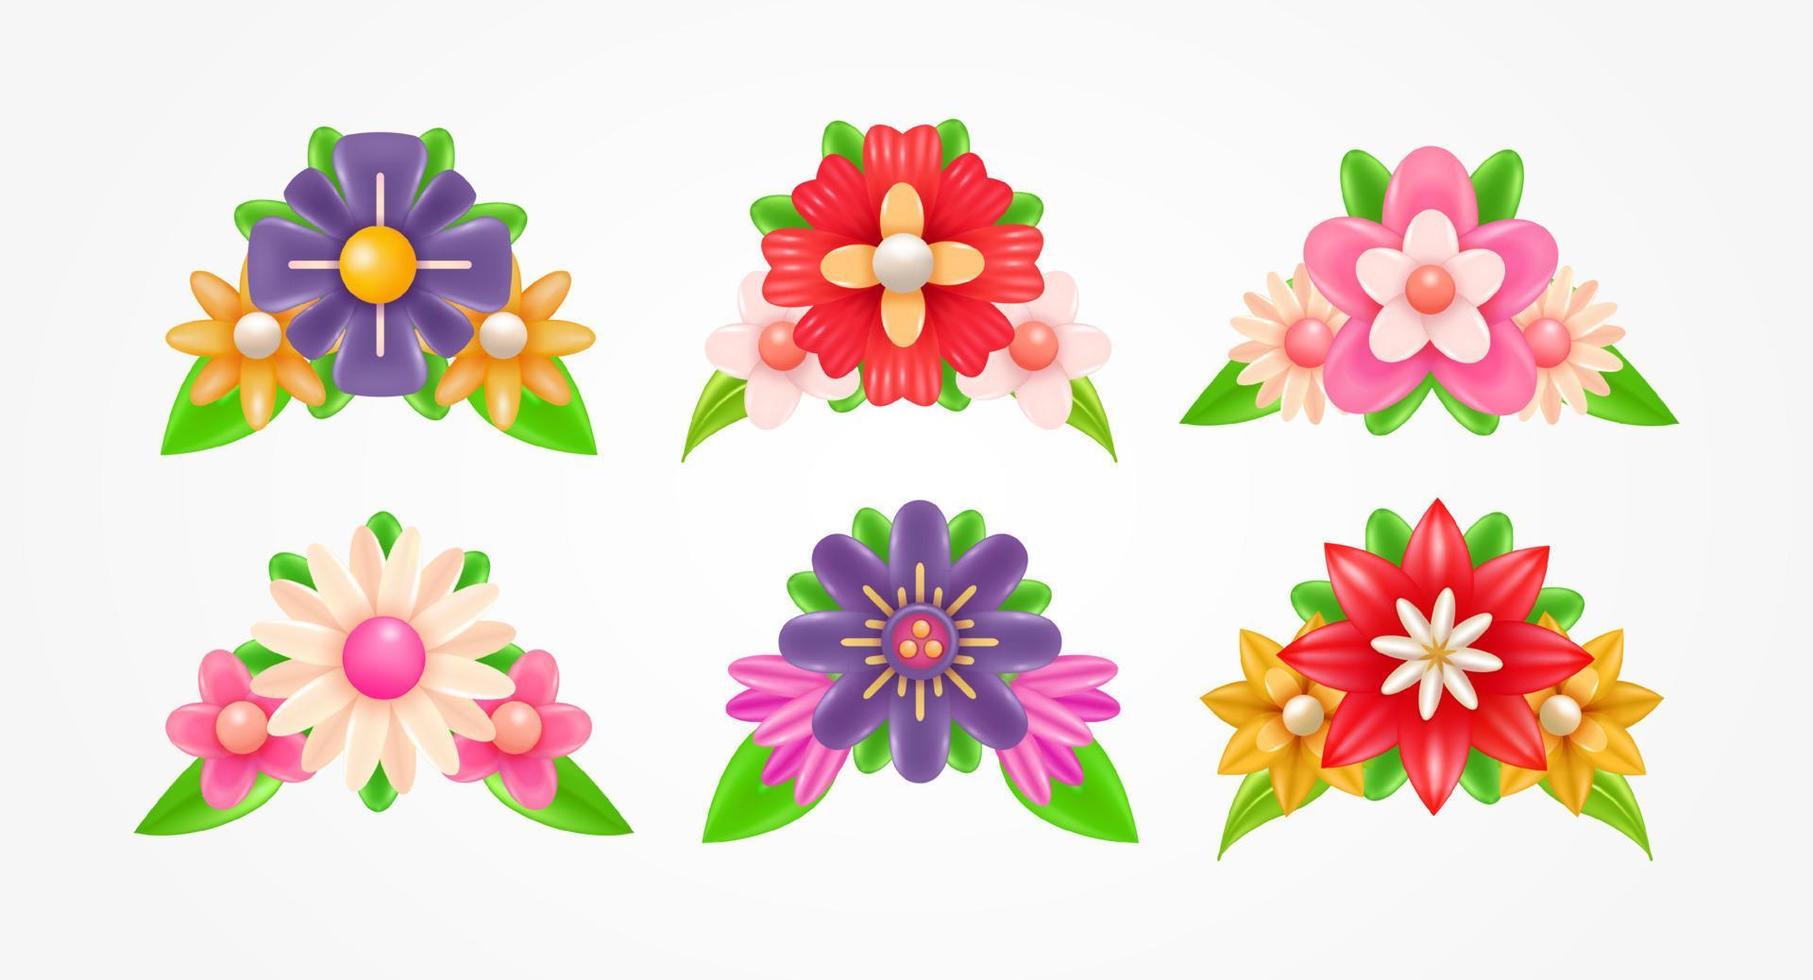 3d flower illustration set. Wreath elements suitable for wedding invitations, birthdays, postcards and greetings vector